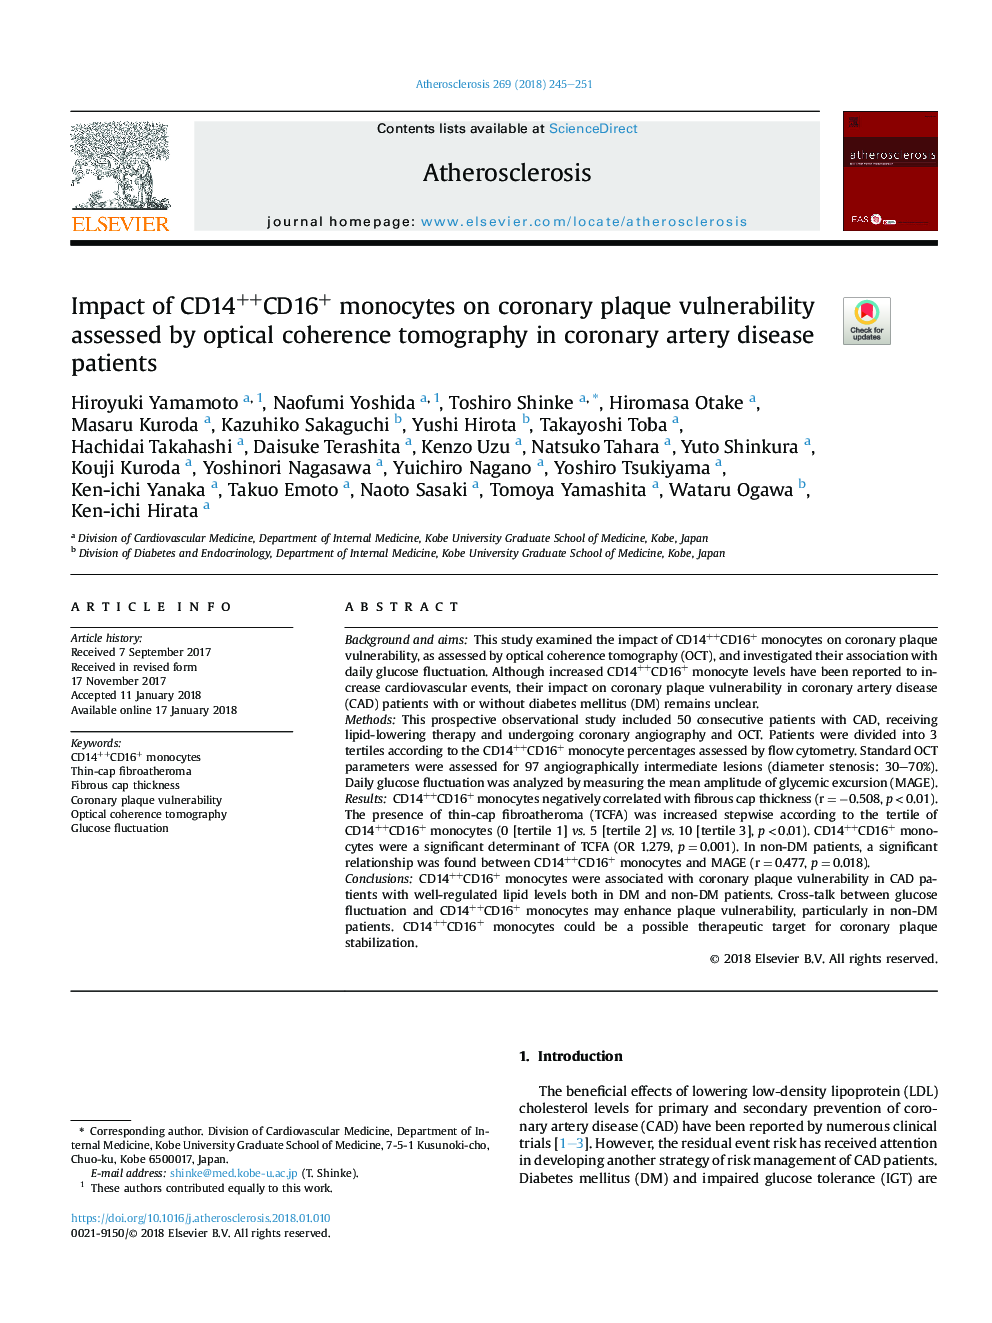 Impact of CD14++CD16+ monocytes on coronary plaque vulnerability assessed by optical coherence tomography in coronary artery disease patients